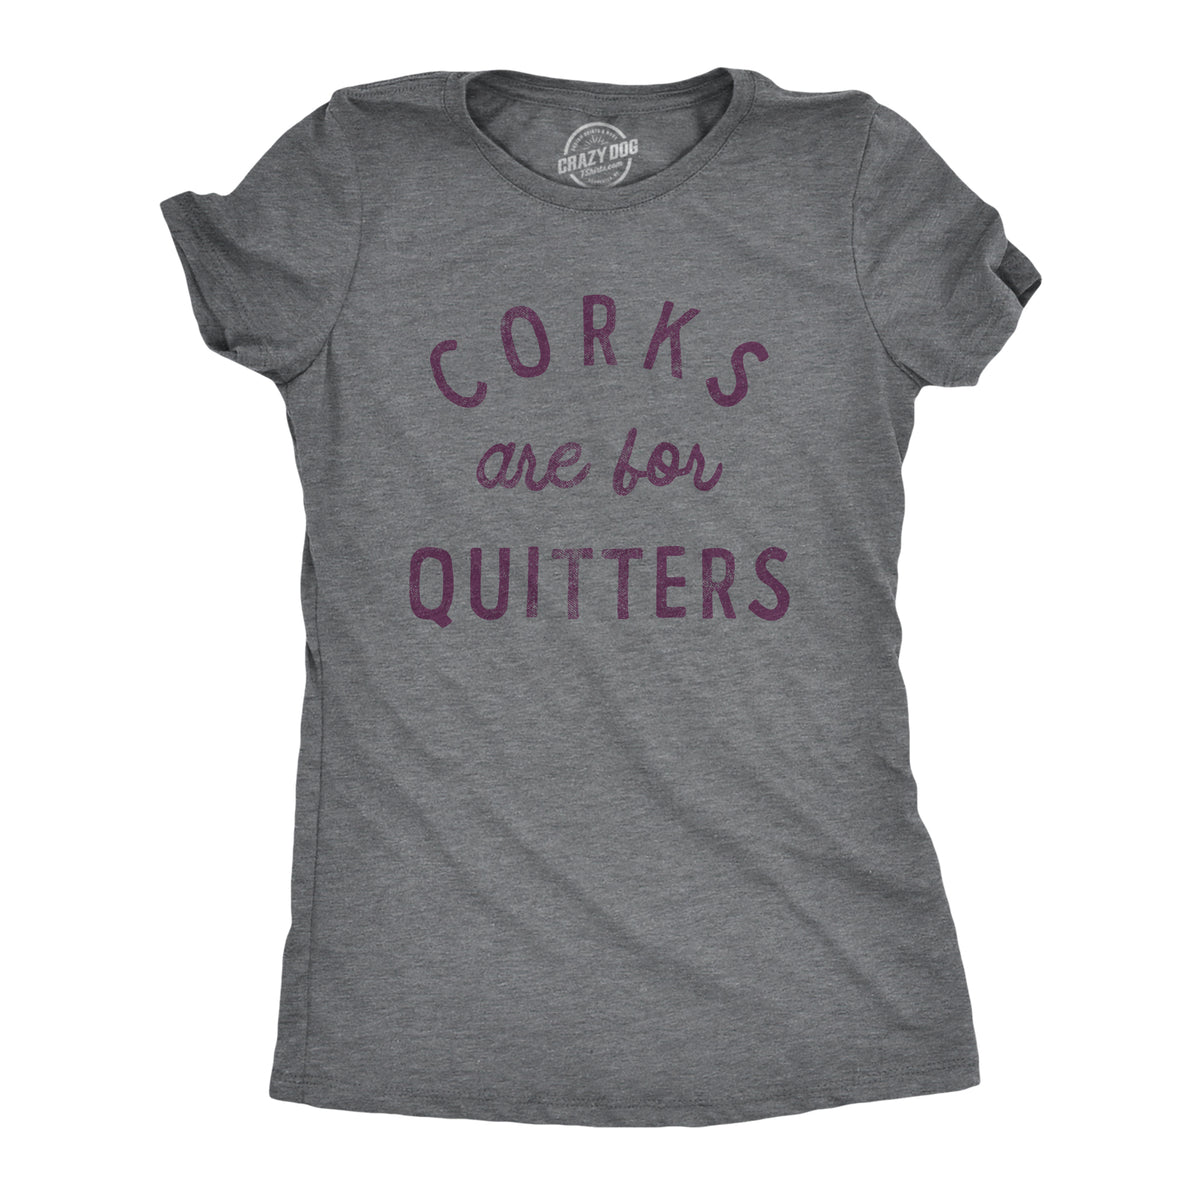 Funny Dark Heather Grey Corks Are For Quitters Womens T Shirt Nerdy Wine Tee